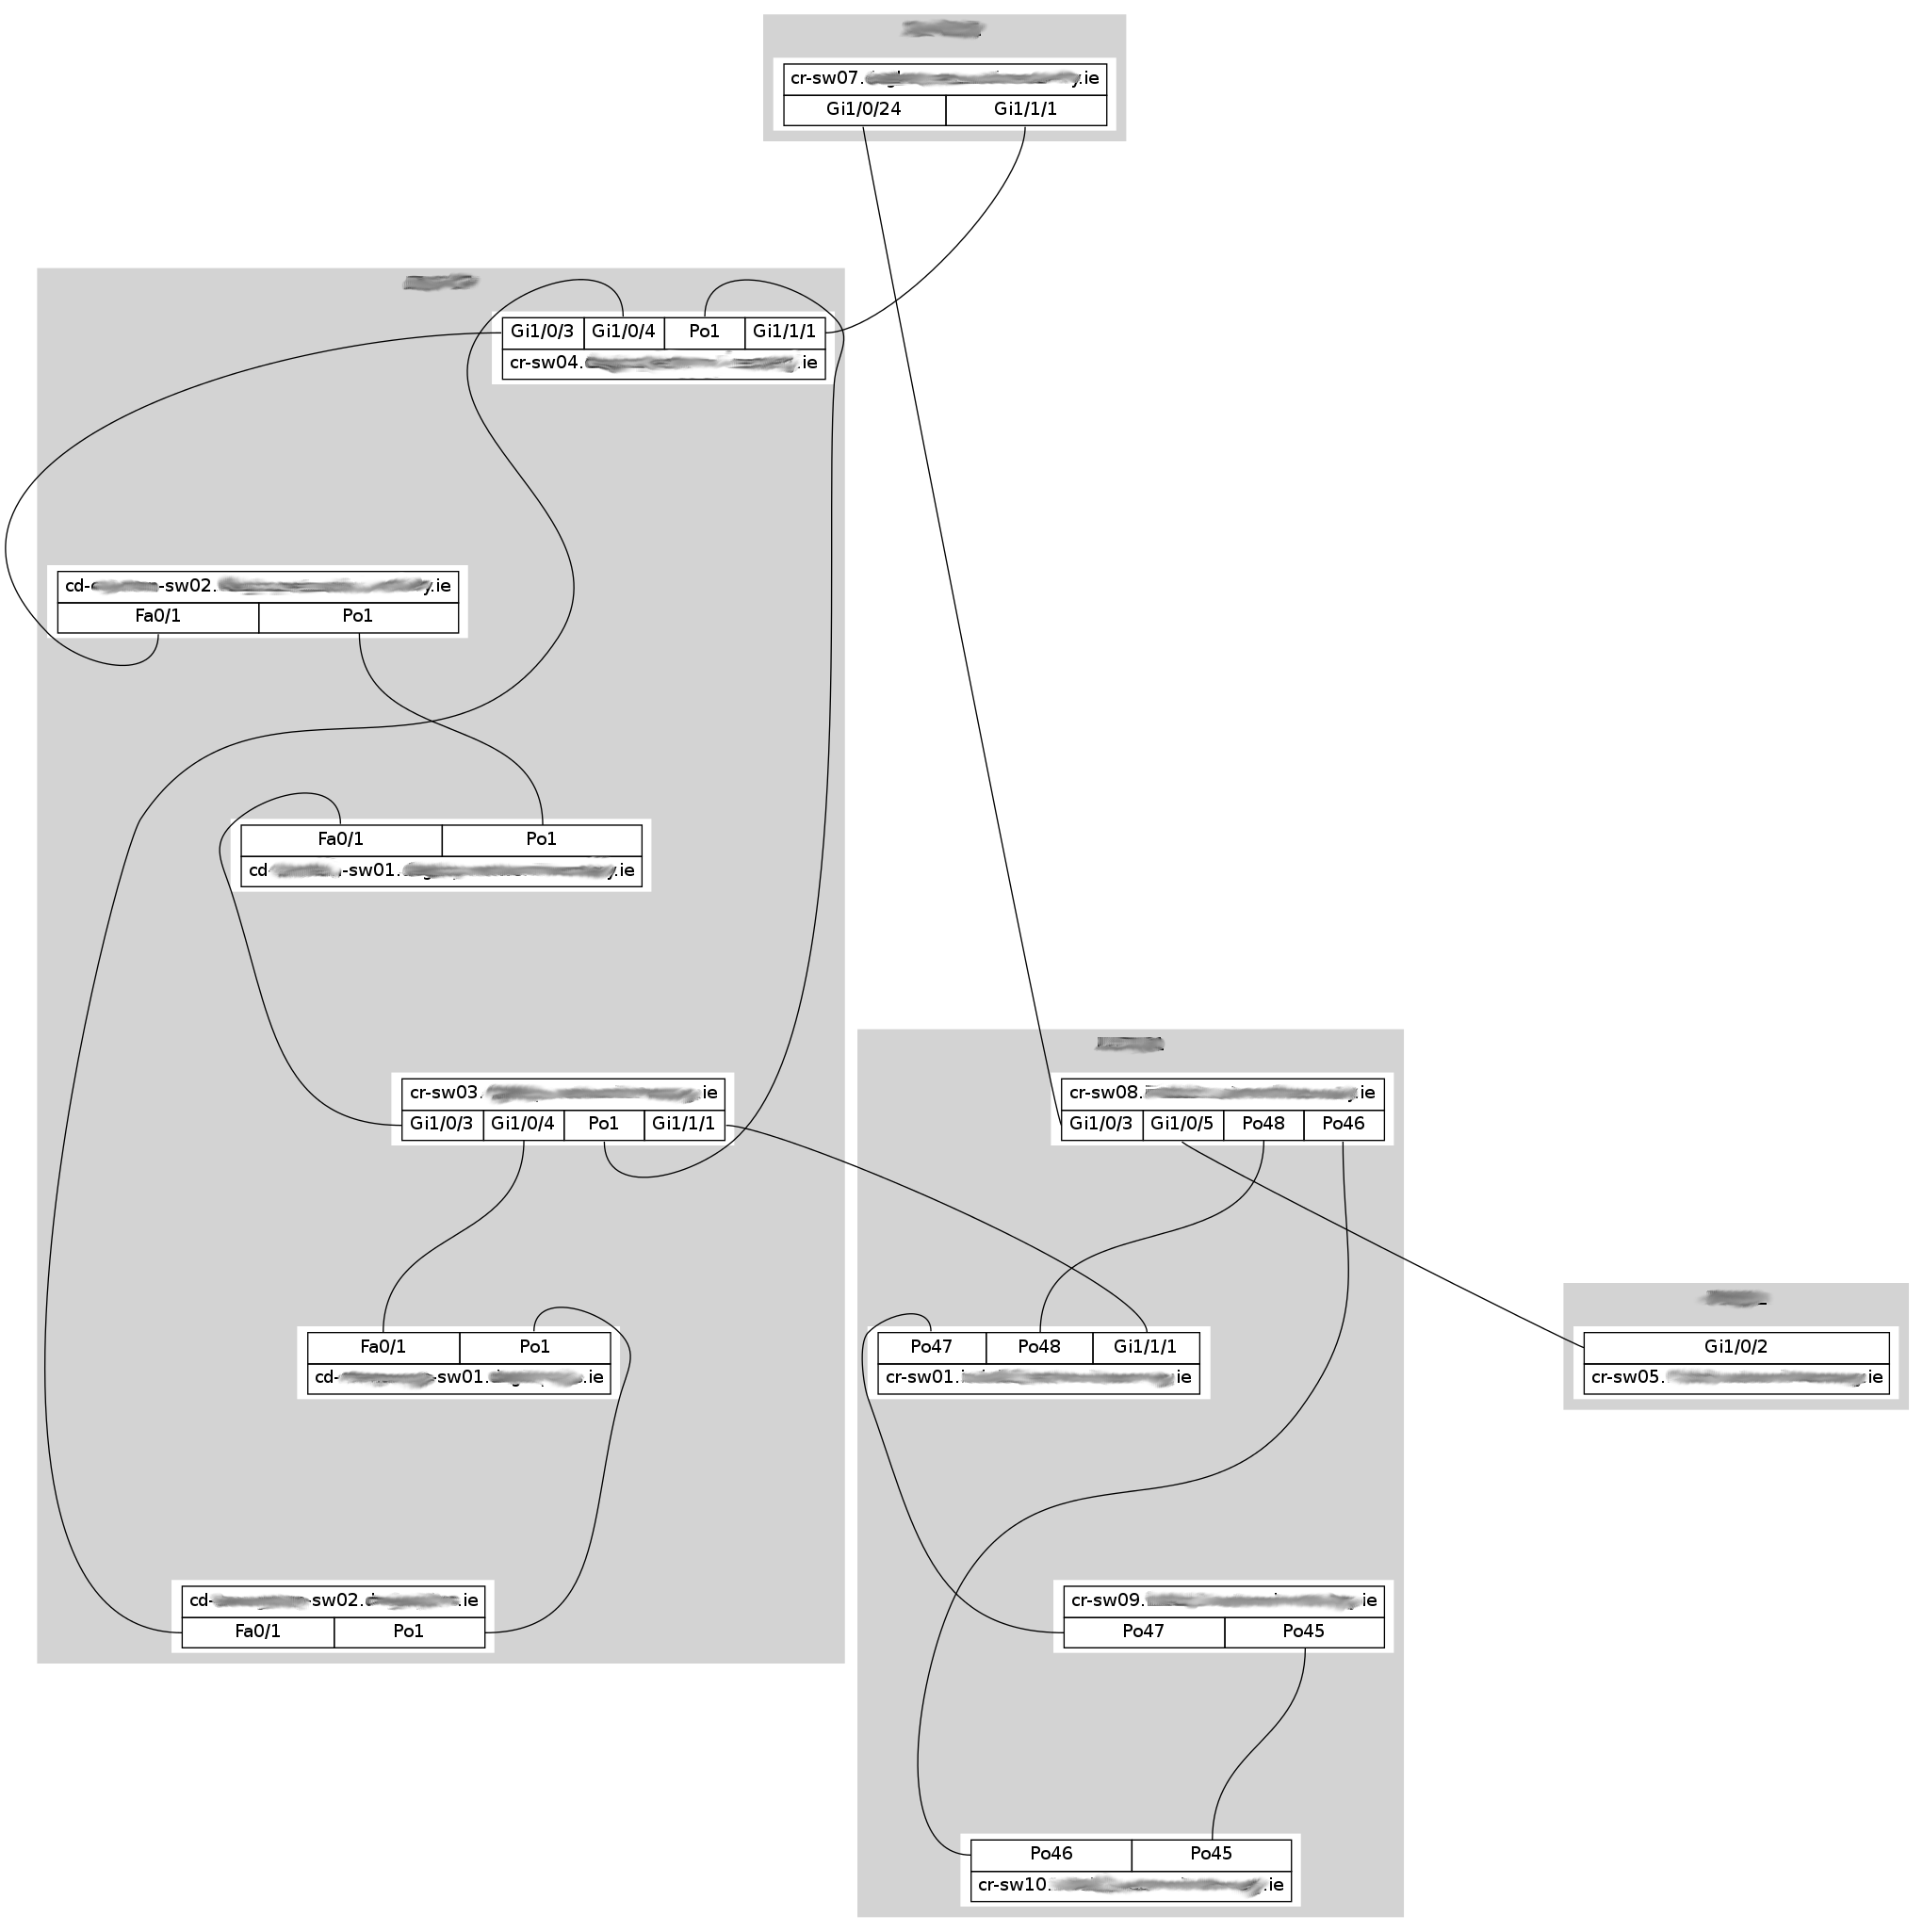 Screenshot of CDP L2 Topology functionality